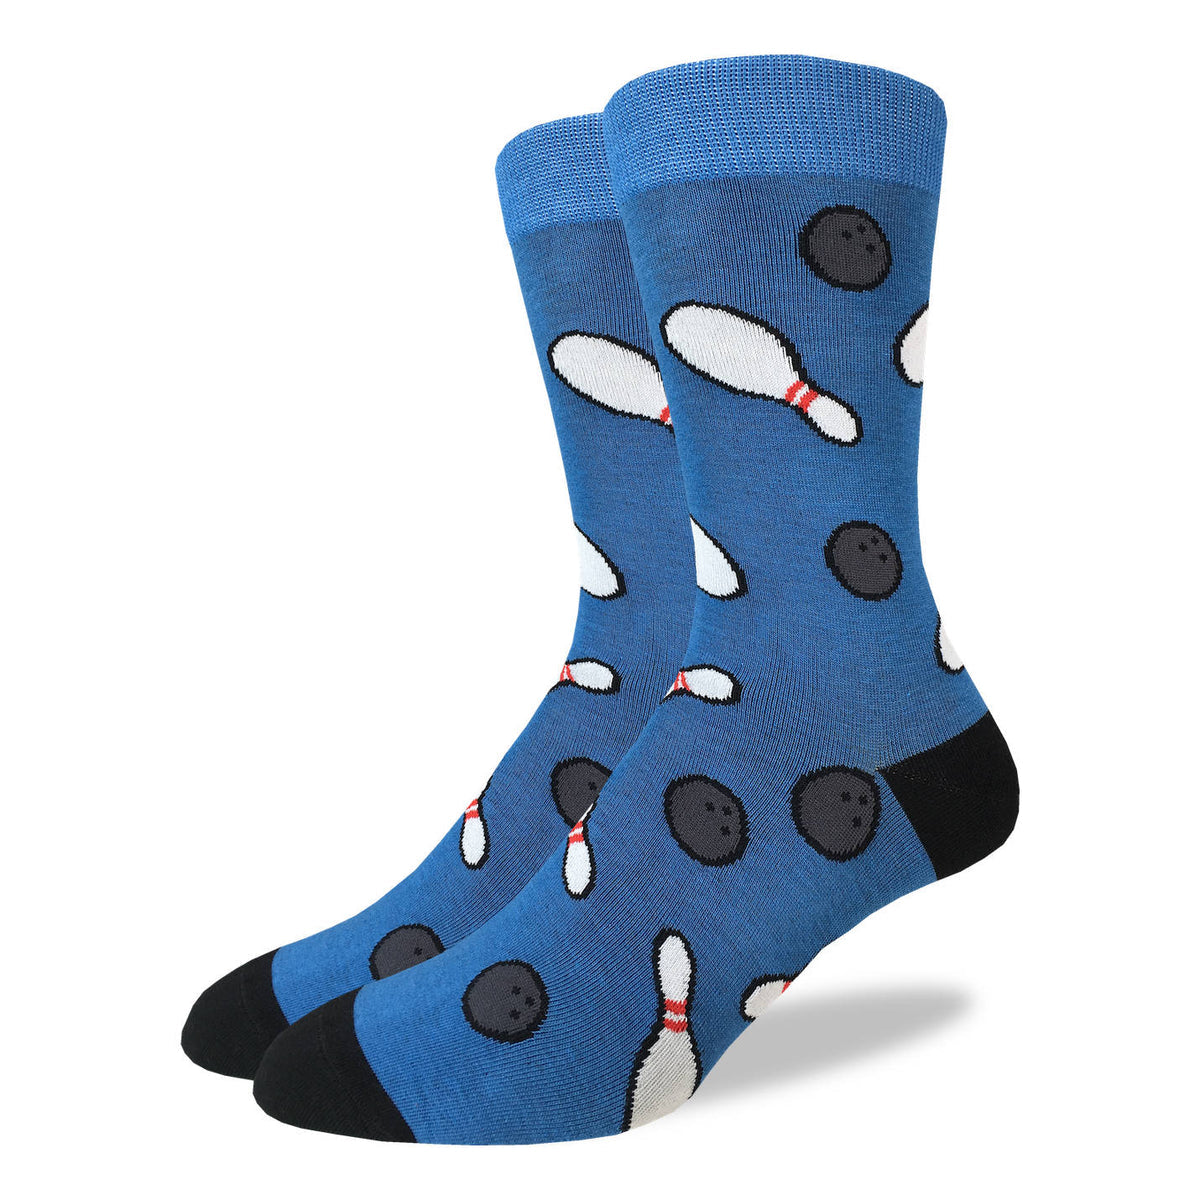 "Bowling" Cotton Crew Socks by Good Luck Sock - SALE